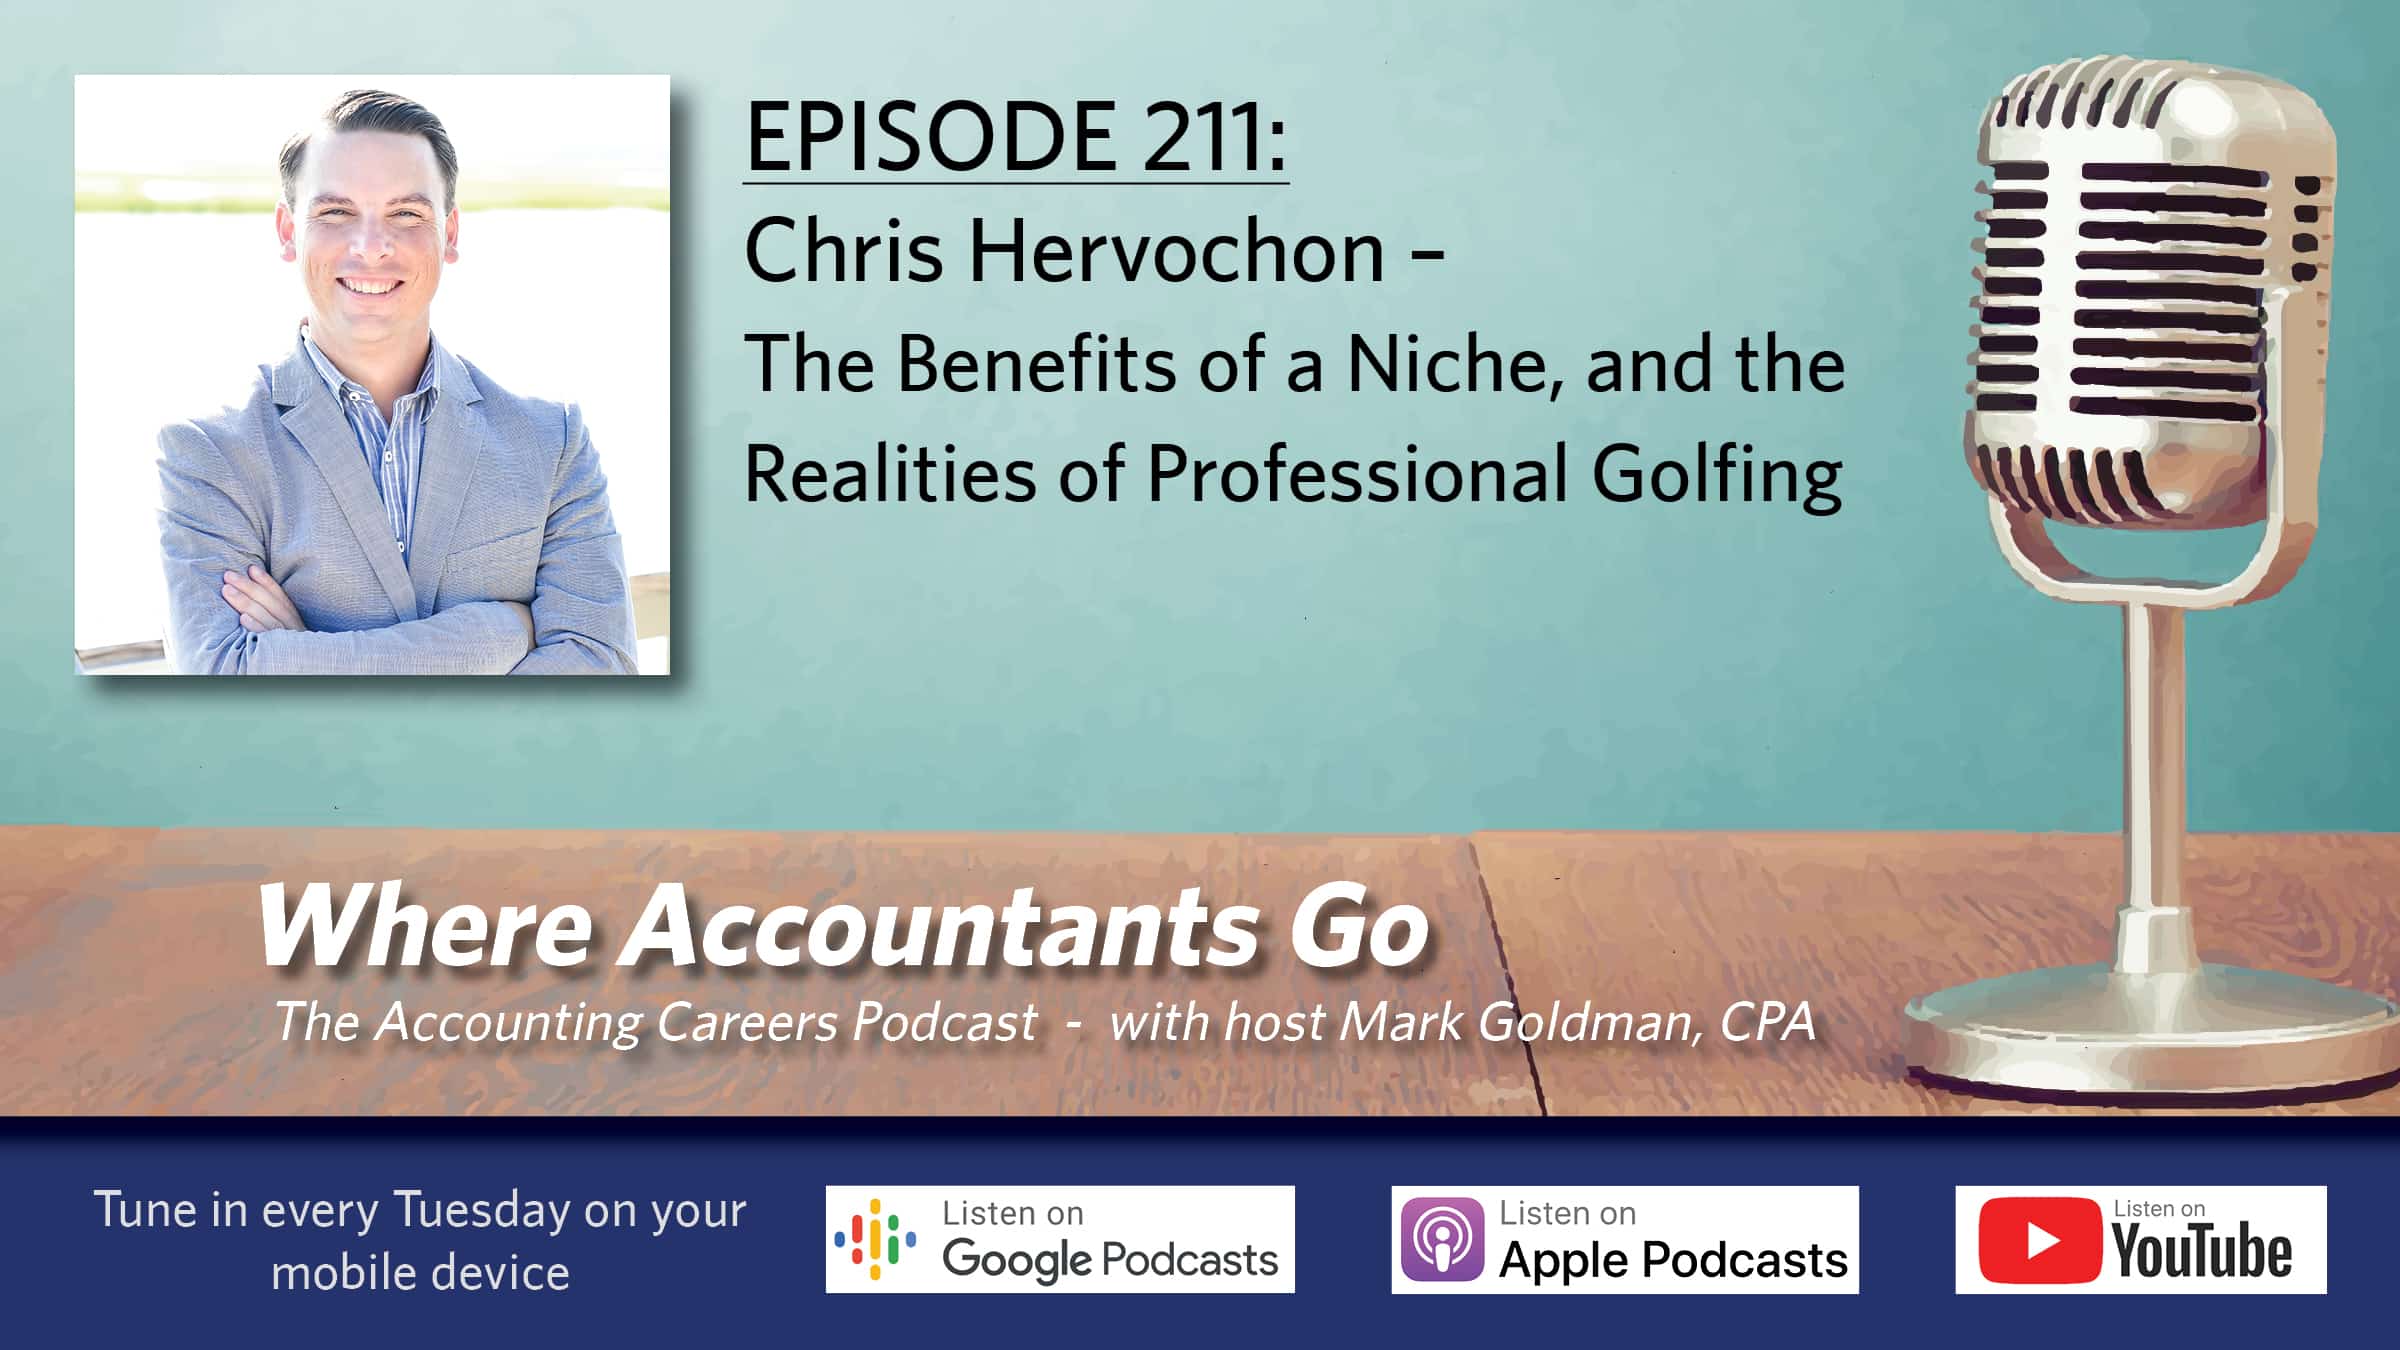 The Benefits of a Niche, and the Realities of Professional Golfing podcast